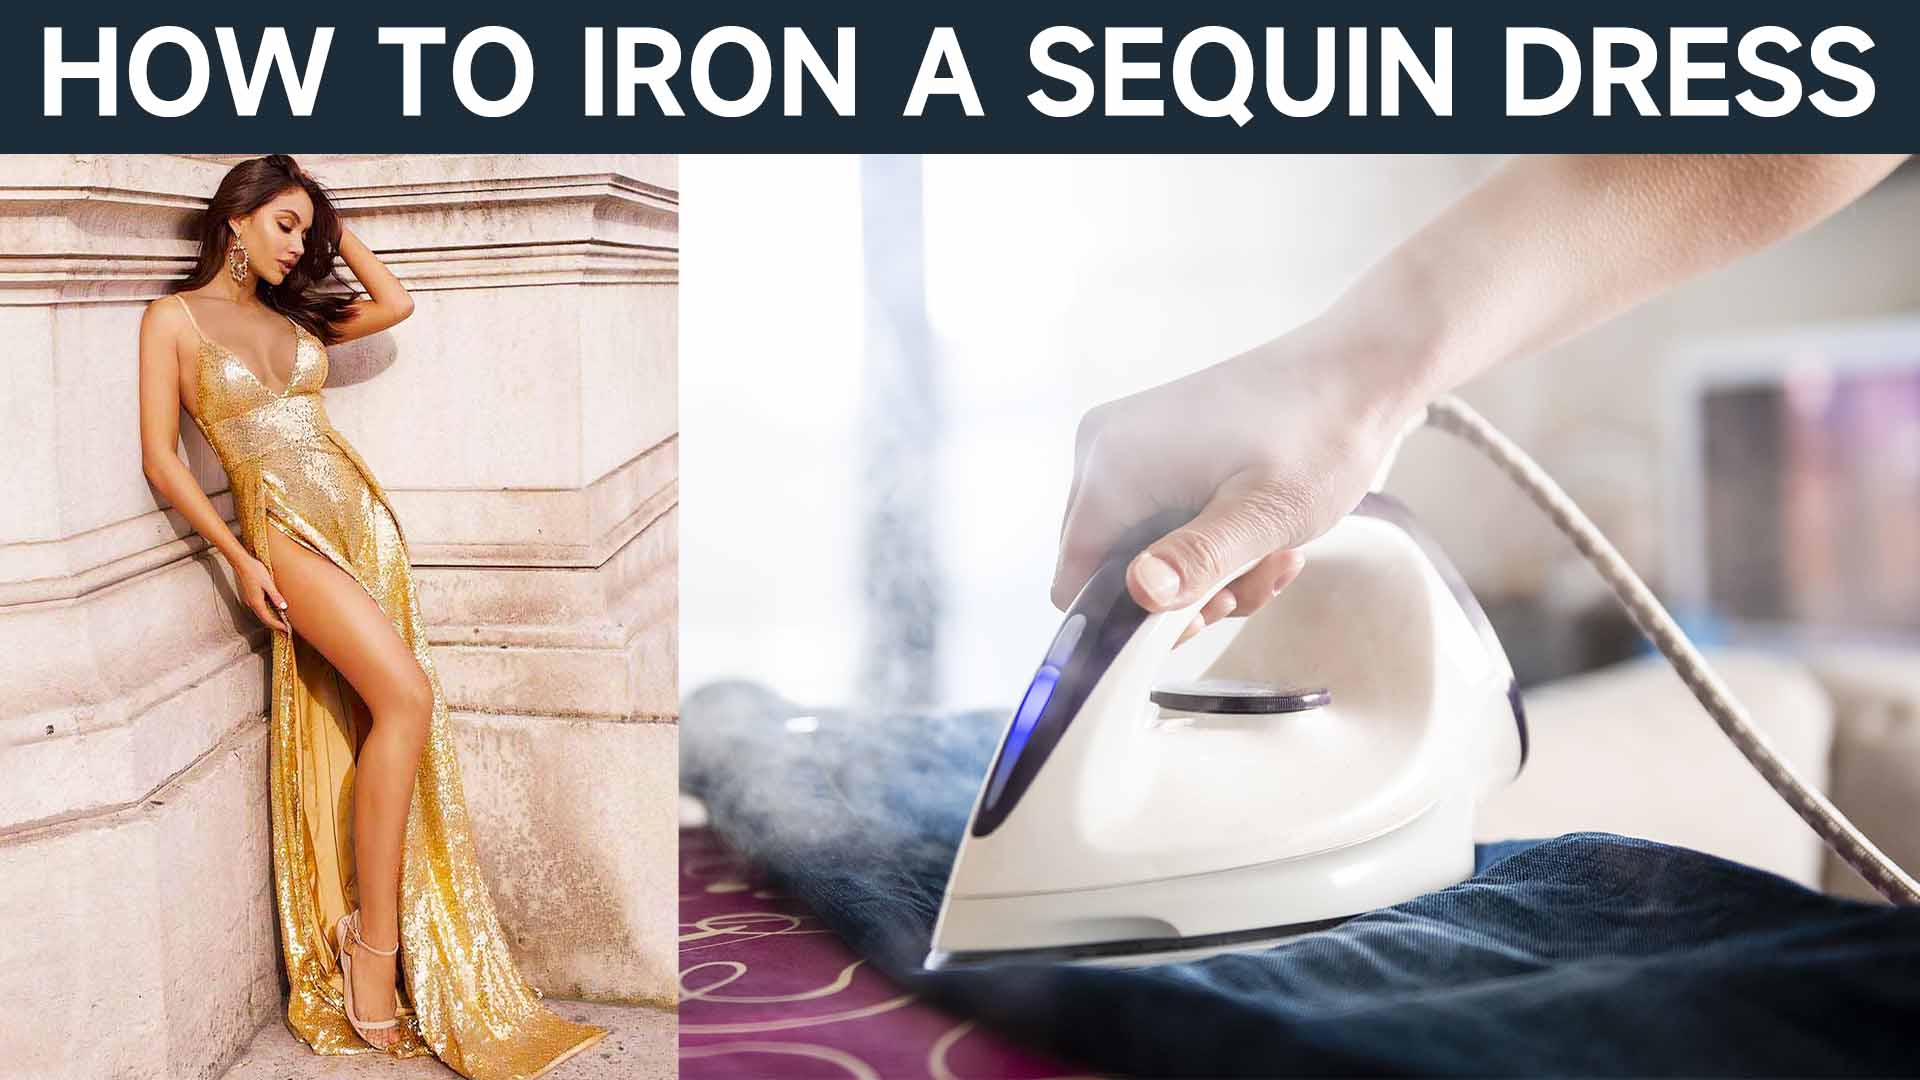 HOW TO IRON A SEQUIN DRESS